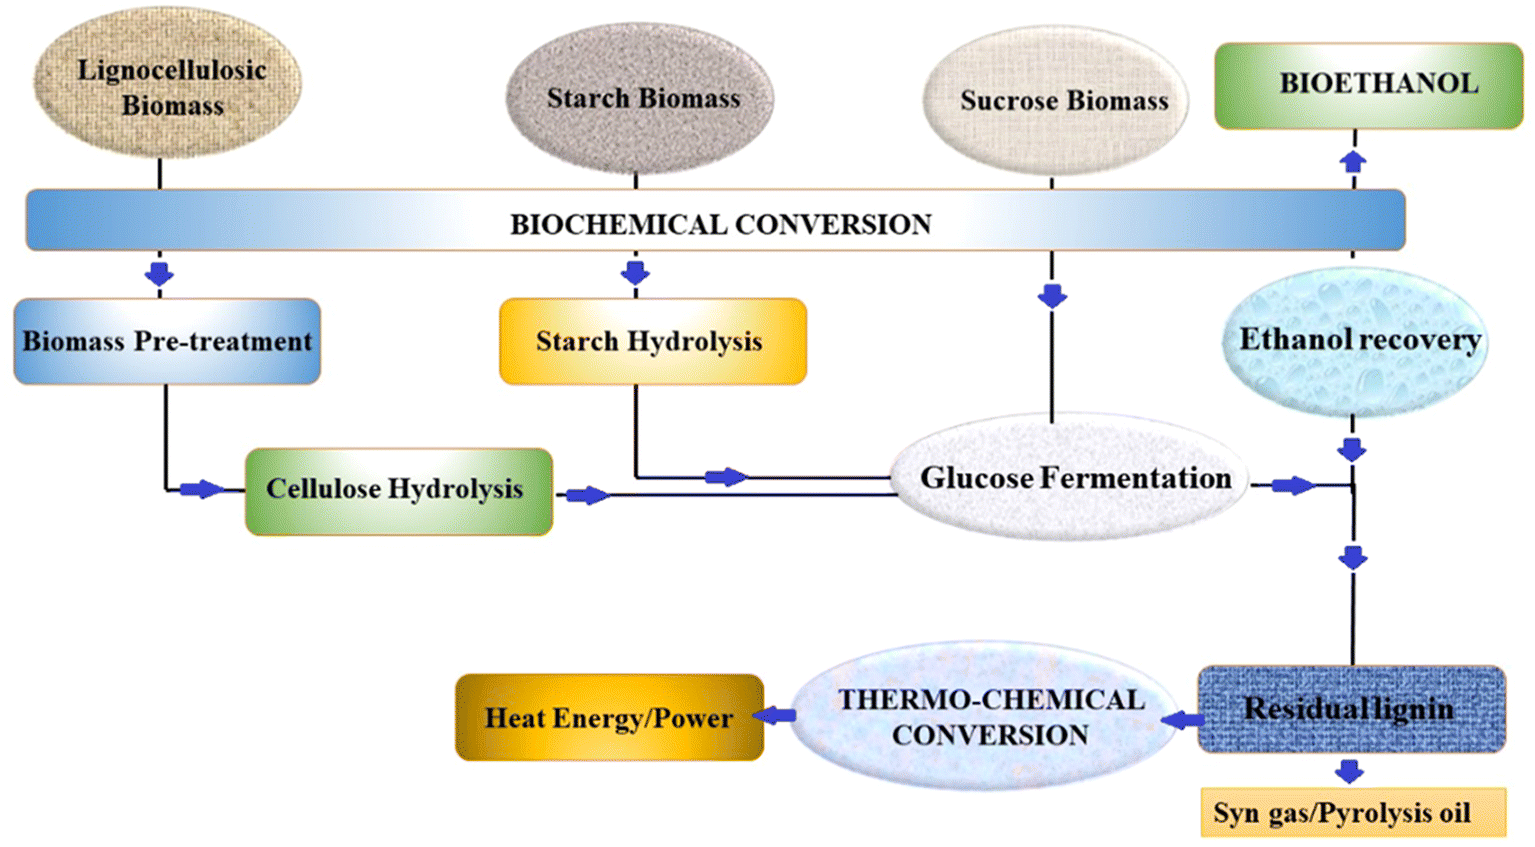 Bioethanol, internal combustion engines and the development of